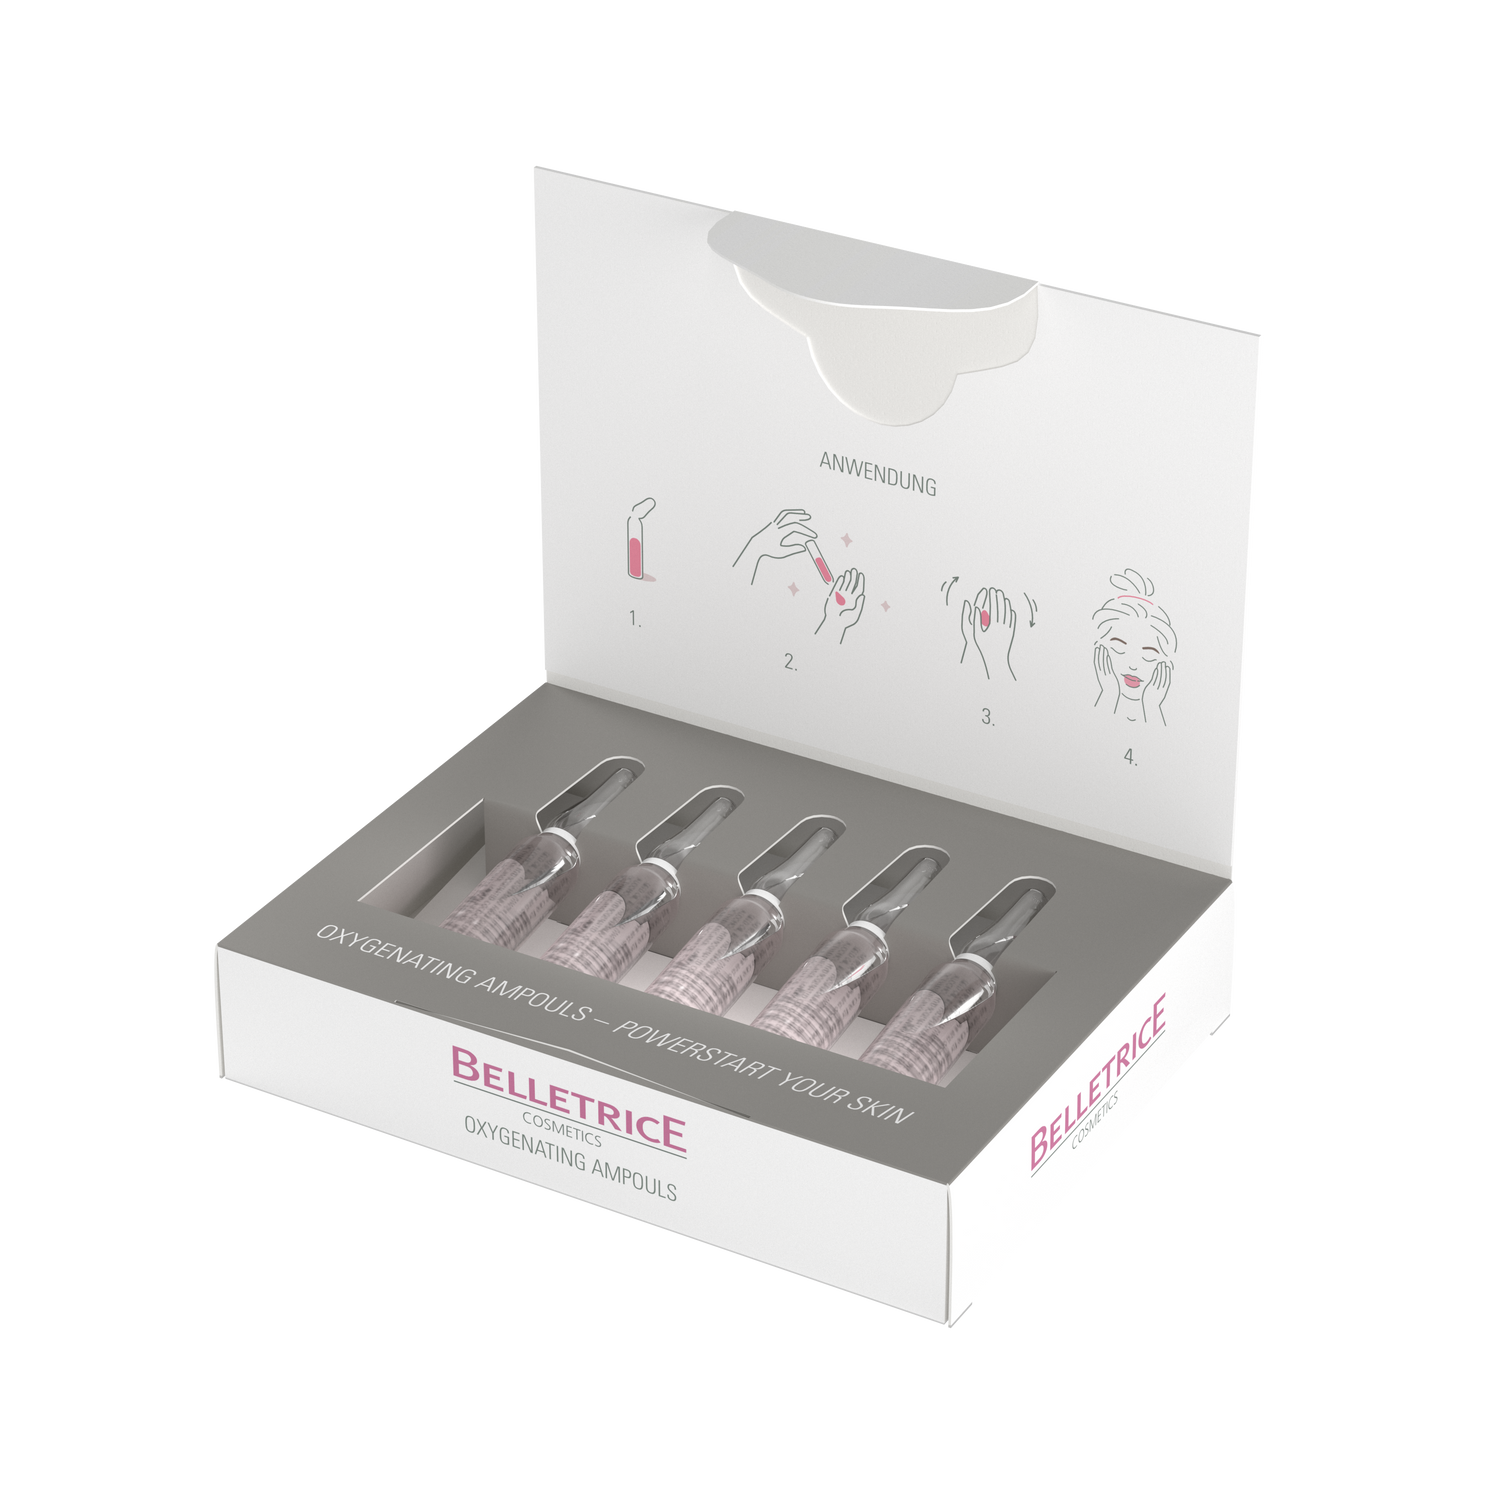 Oxygenating ampoules